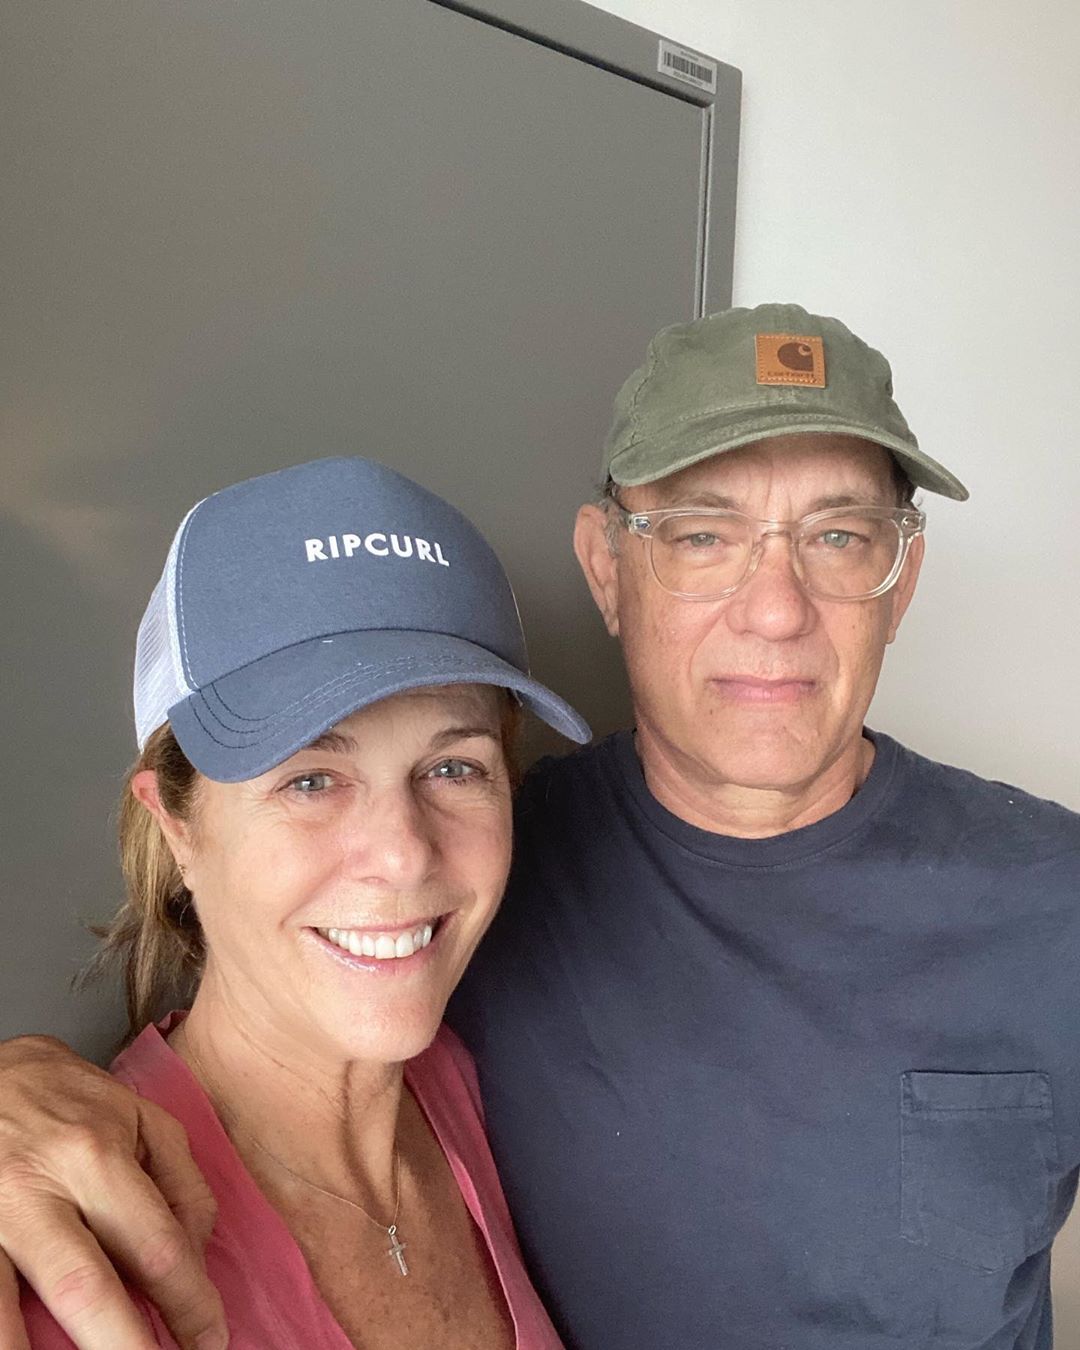 Tom Hanks and his wife